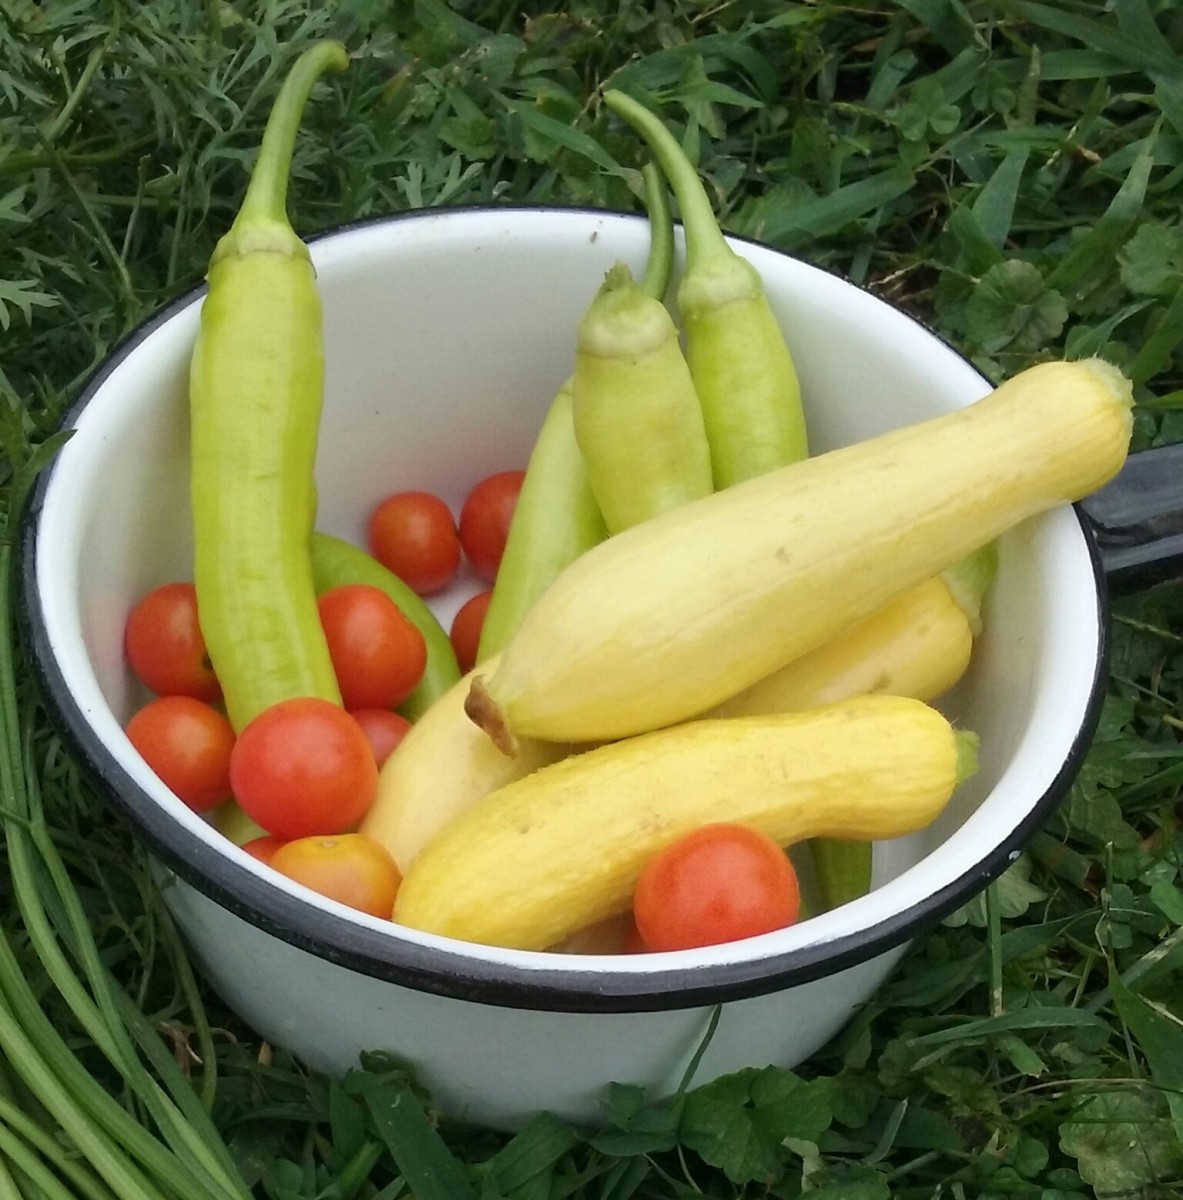 Here is a harvest from my backyard Climate Victory Garden. These tasted SO good! In addition, they fed my soul knowing that I was helping the world.